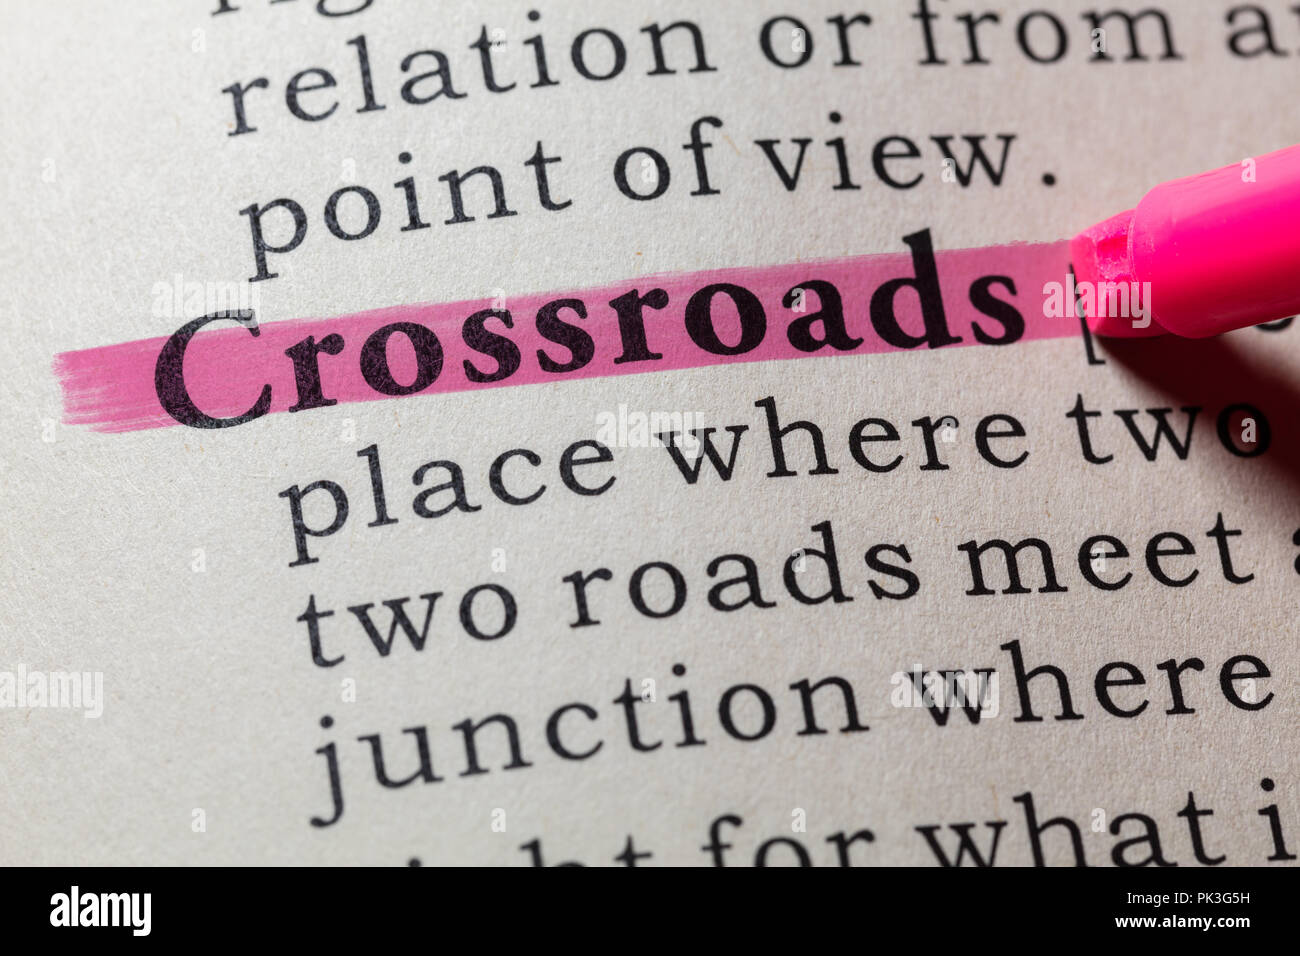 Fake Dictionary, Dictionary definition of the word crossroads. including key descriptive words. Stock Photo